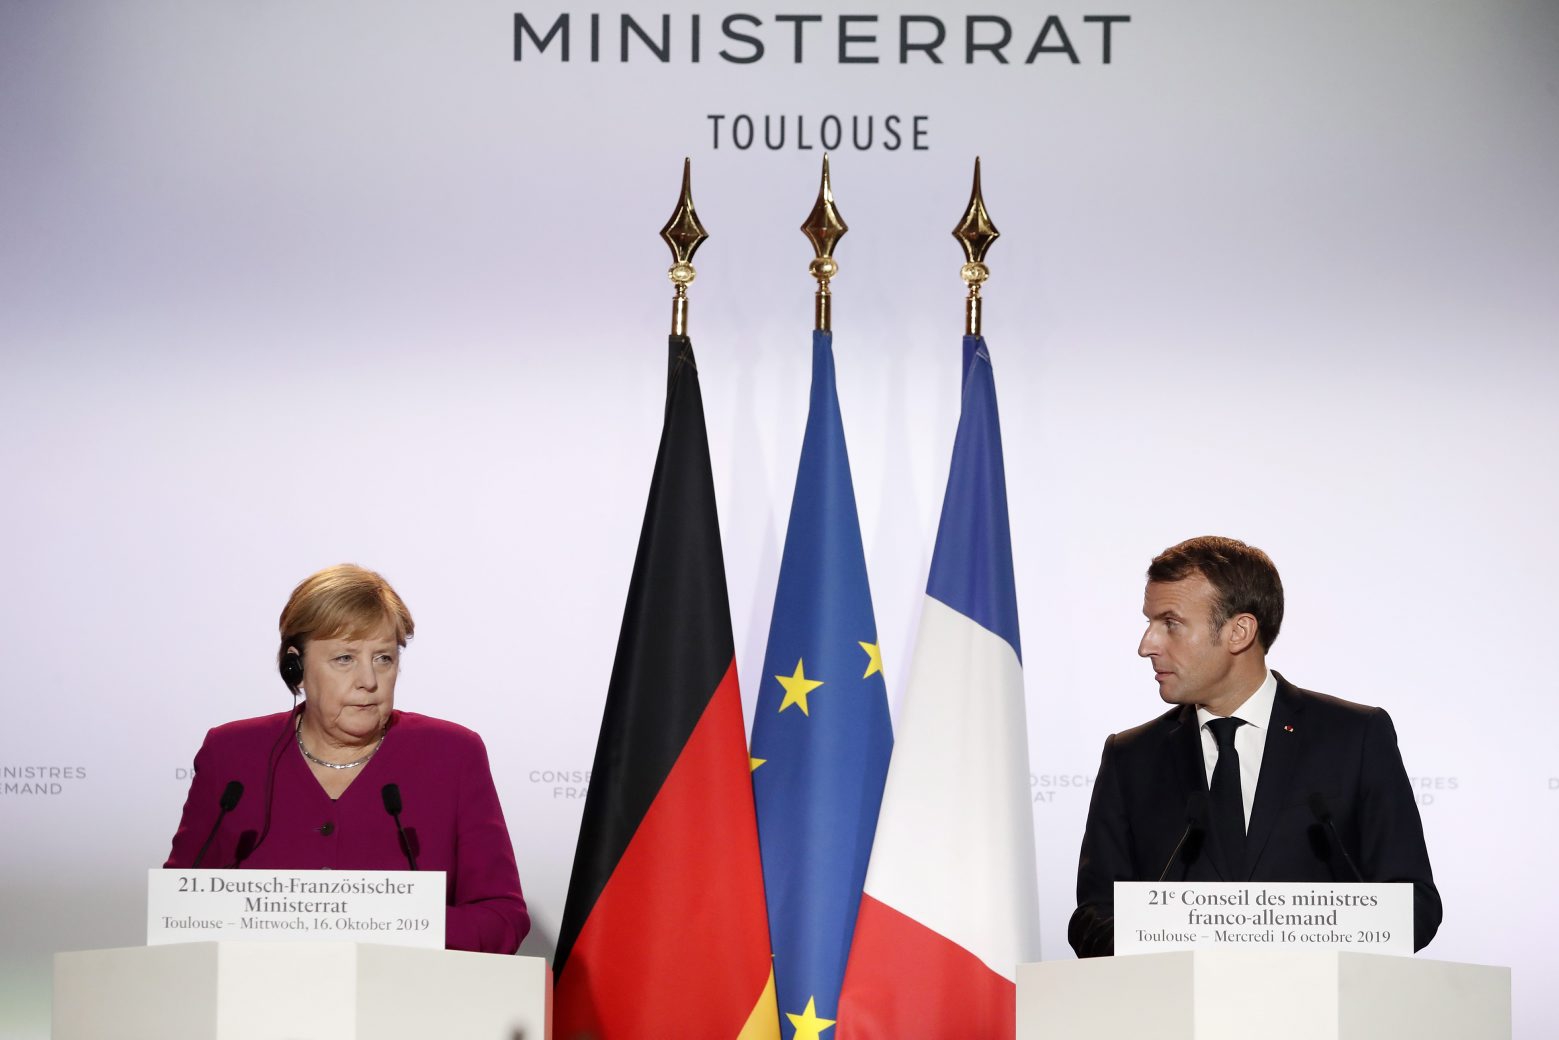 epa07925777 French President Emmanuel Macron (R) and German Chancellor Angela Merkel (L) hold a press conference following a German-French Ministerial Council at the Haute-Garonne Prefecture in Toulouse, France, 16 October 2019, one day before a key EU summit that may approve a divorce deal with Britain.  EPA/GUILLAUME HORCAJUELO FRANCE GERMANY DIPLOMACY